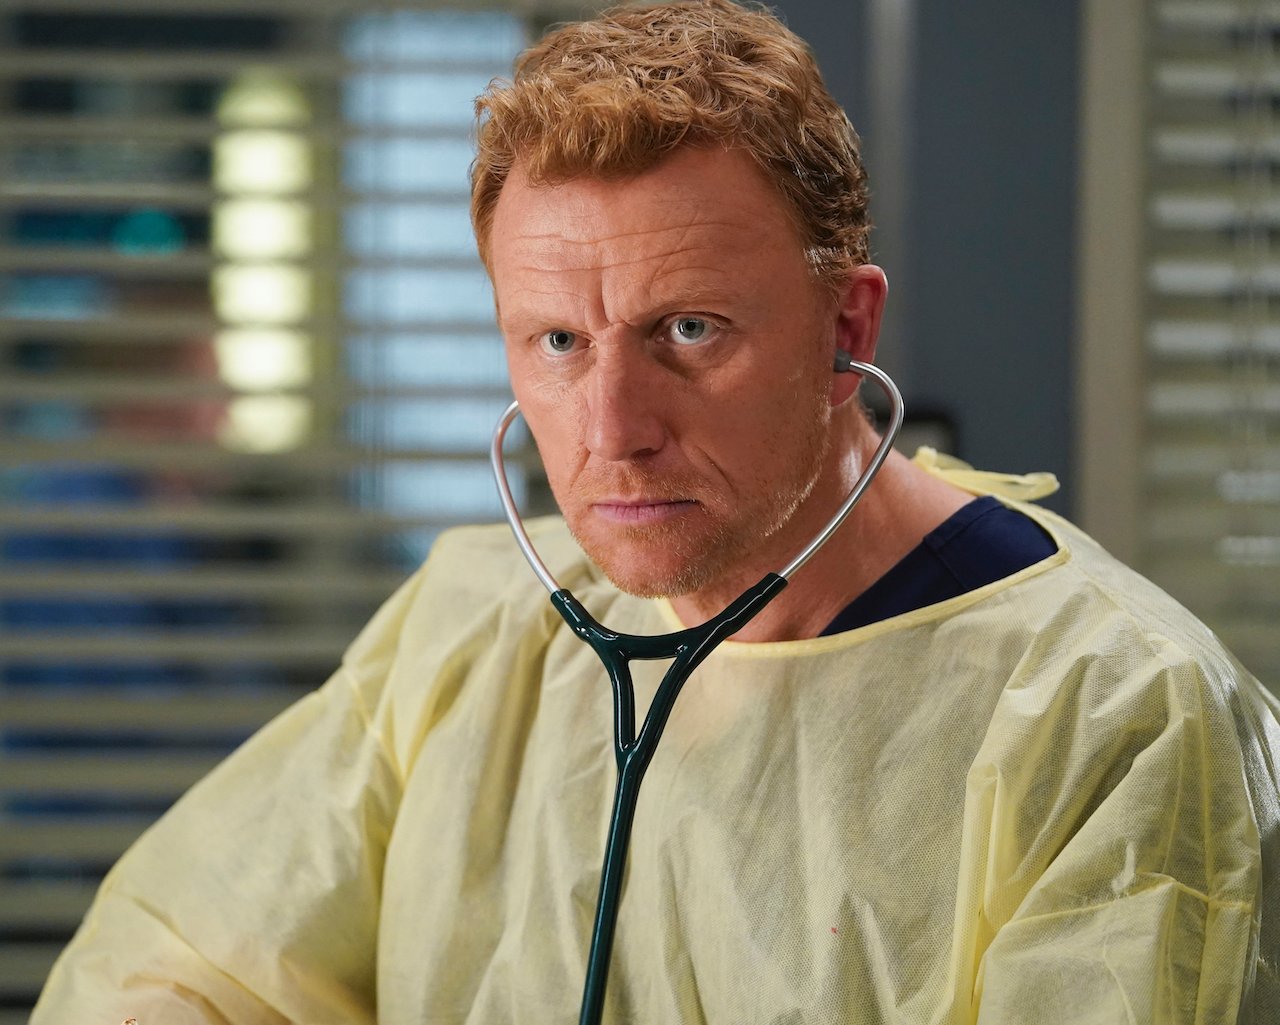 Kevin McKidd as Owen Hunt on 'Grey's Anatomy' is working in the hospital.